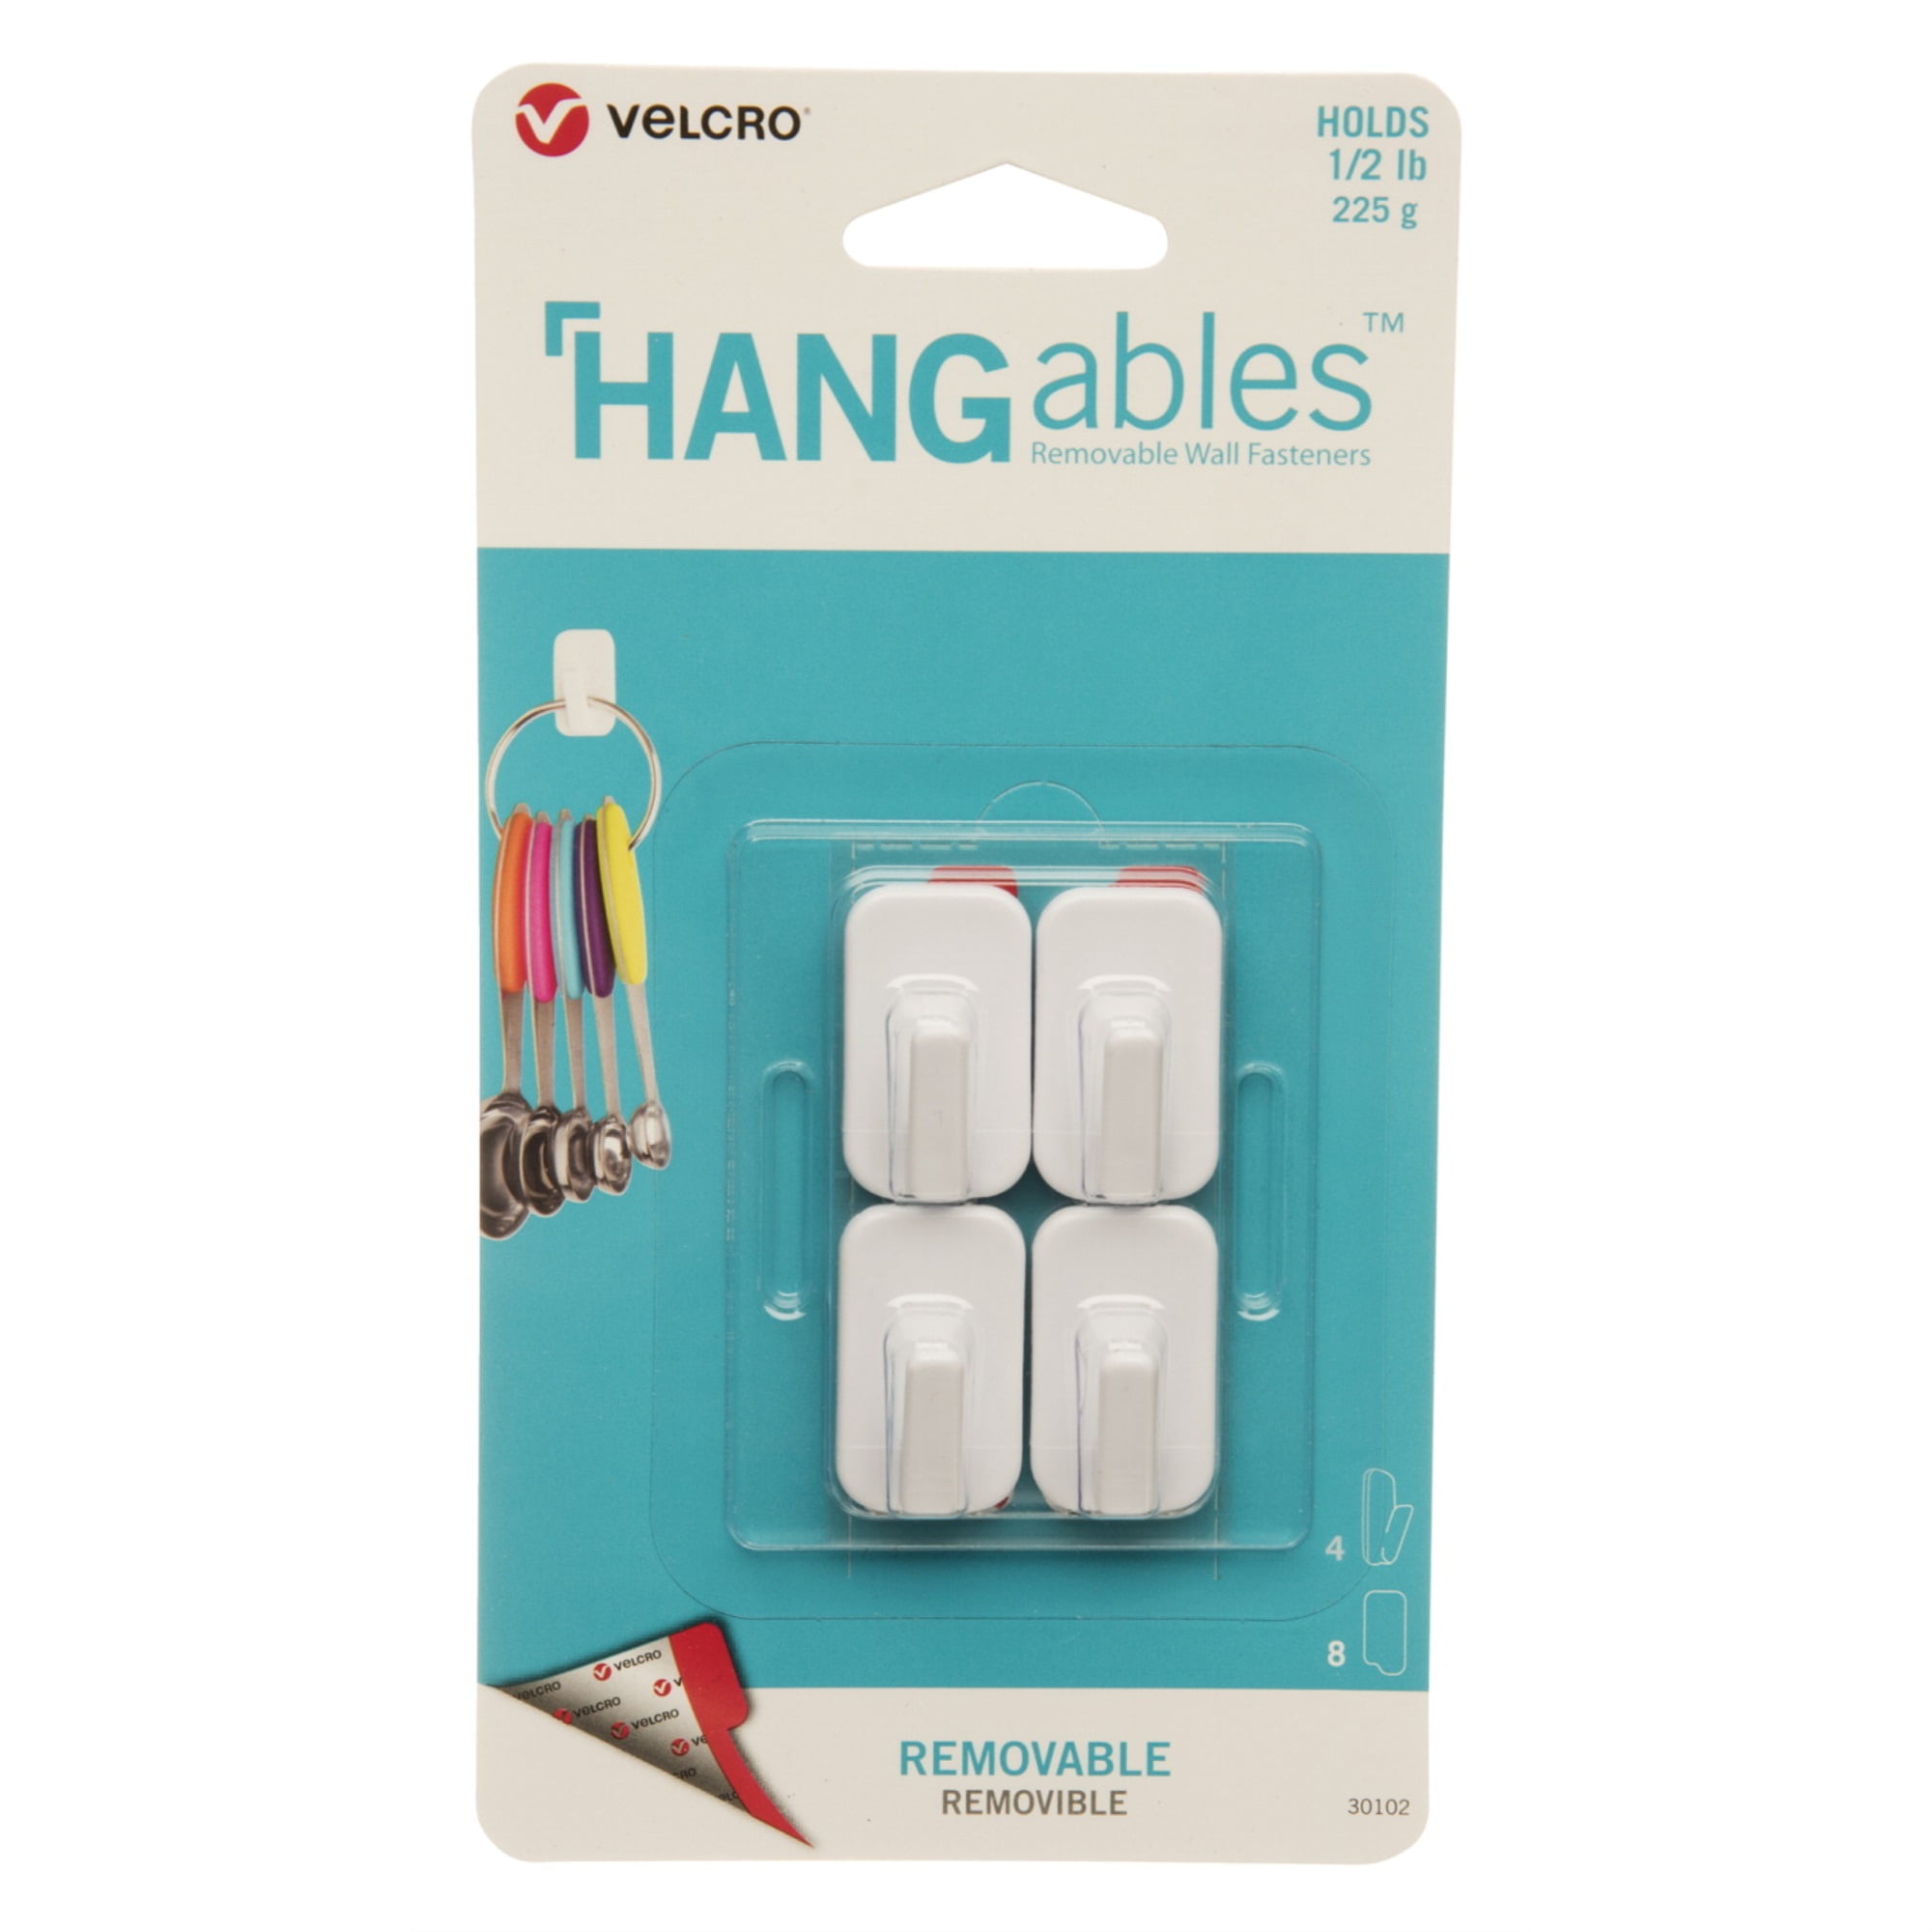 Adhesive Hangers for hanging lightweight posters